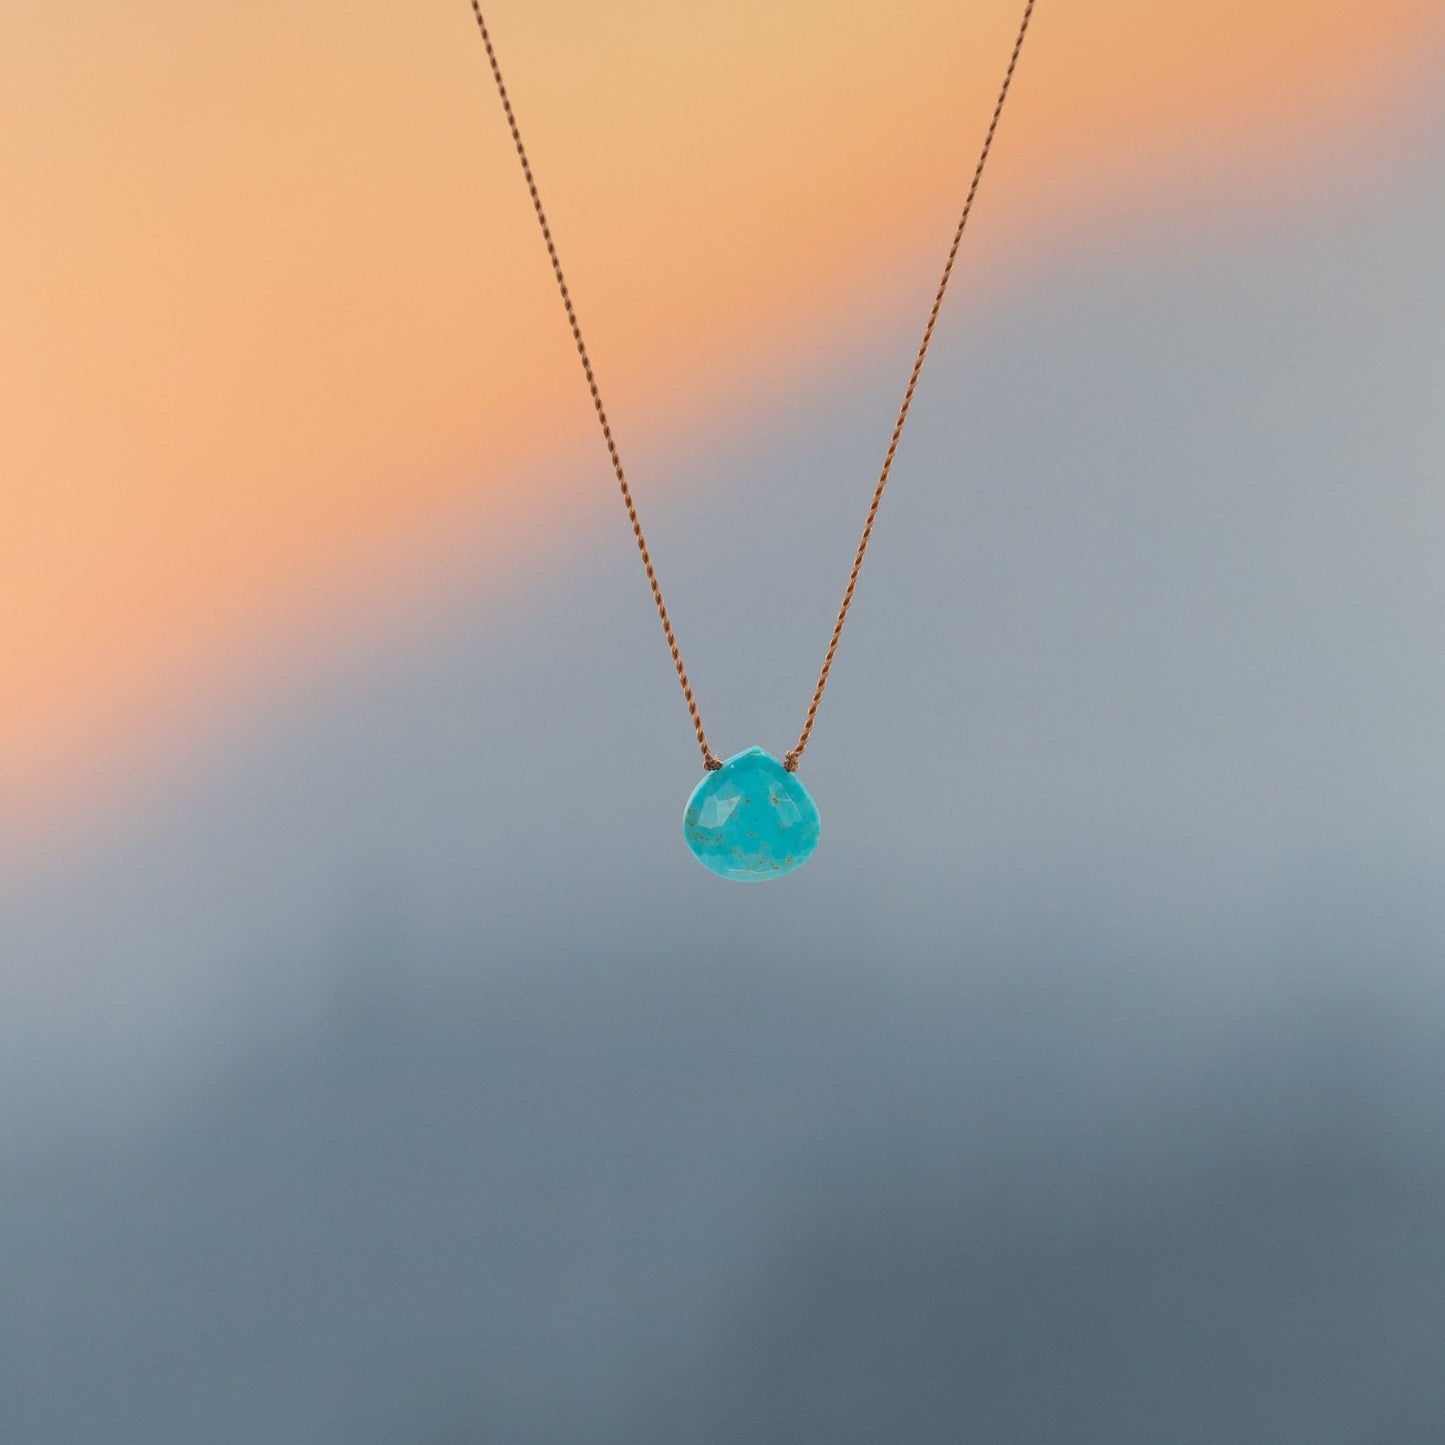 Sleeping Beauty Faceted Turquoise Zen Gem Necklace